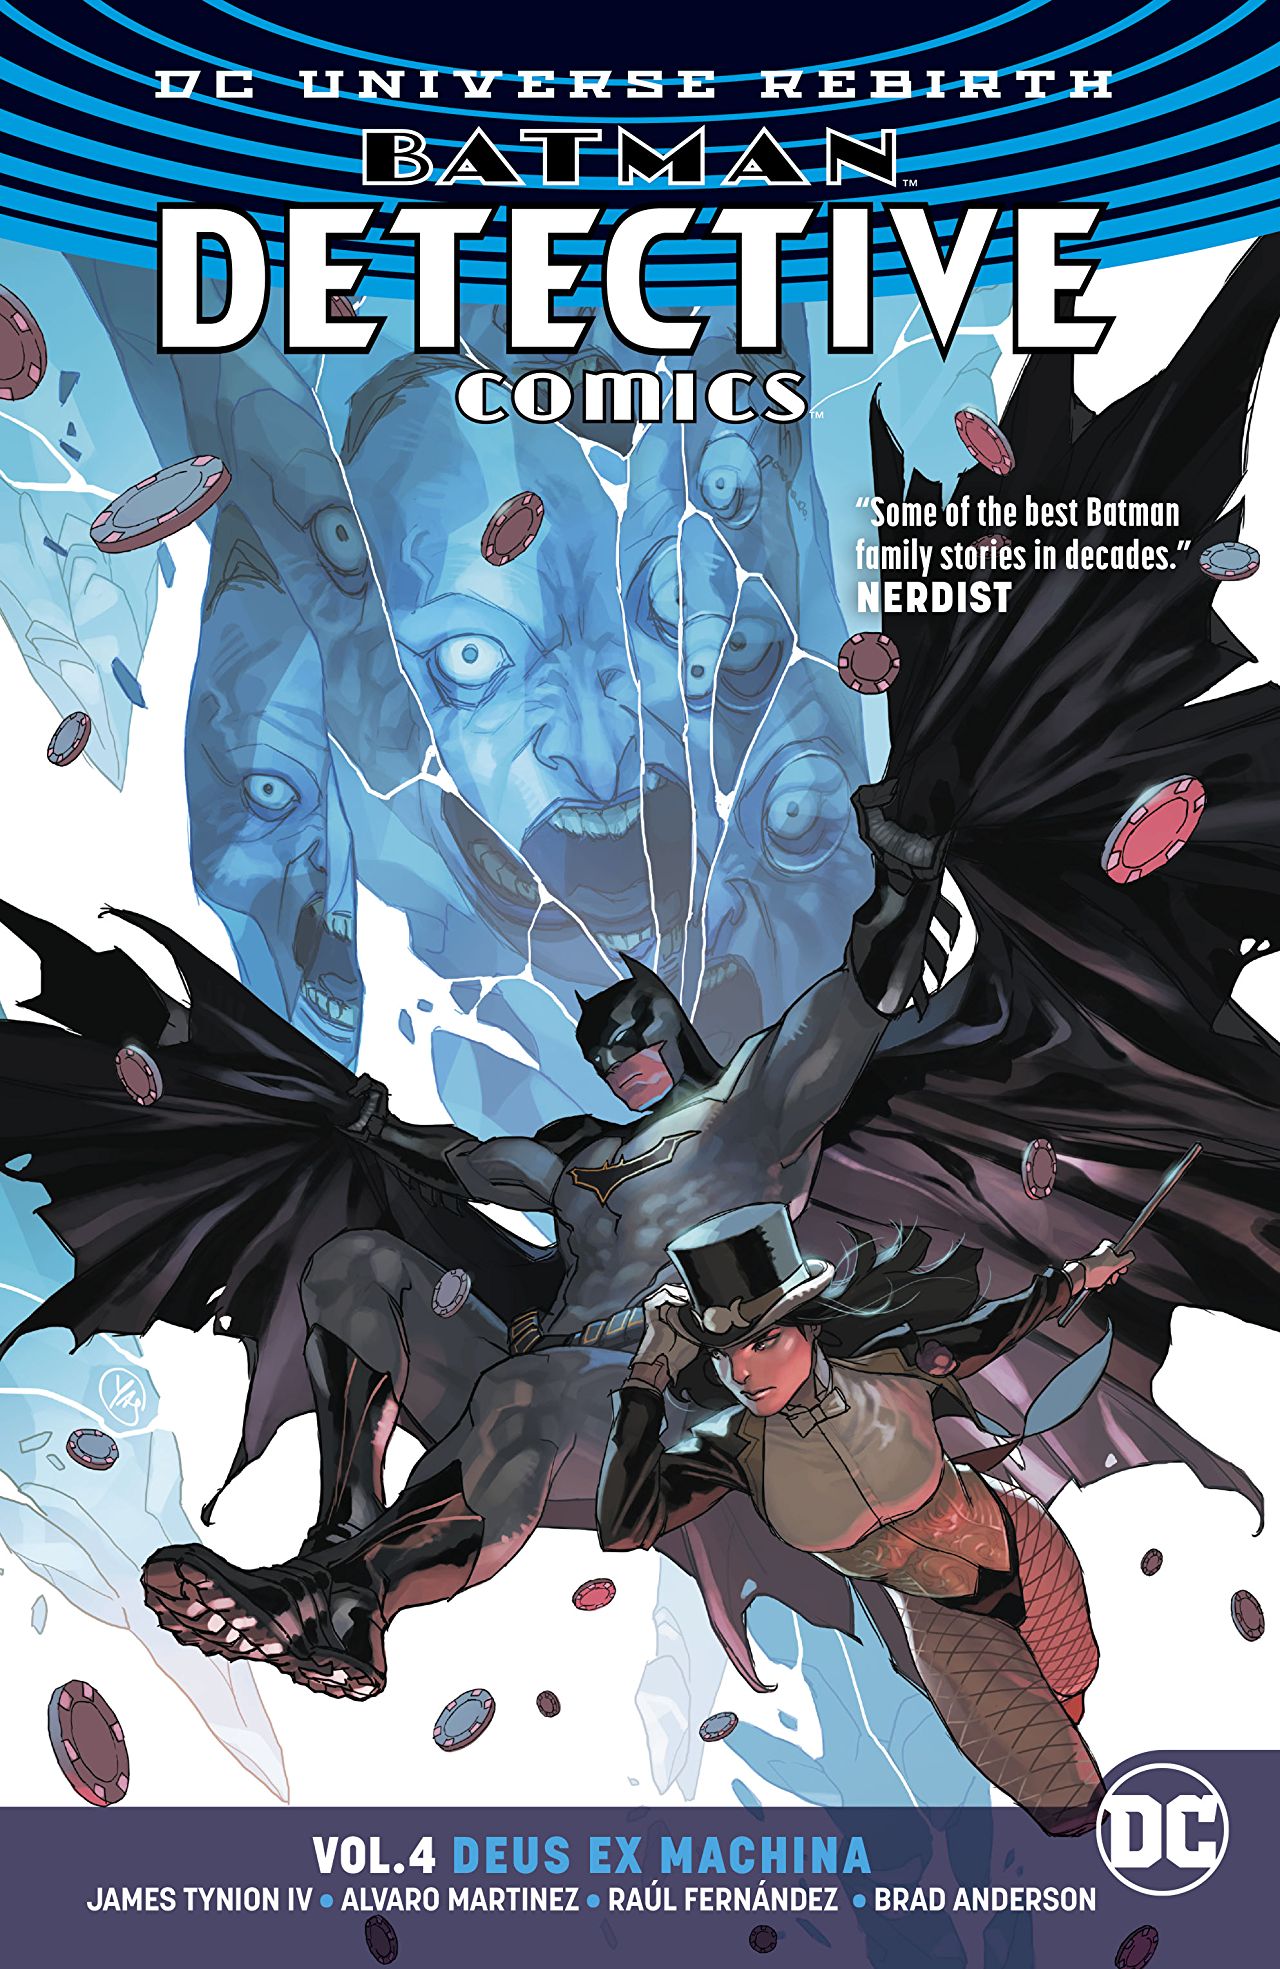 'Detective Comics Vol. 4: Deus Ex Machina' adds intrigue, but carries too much baggage